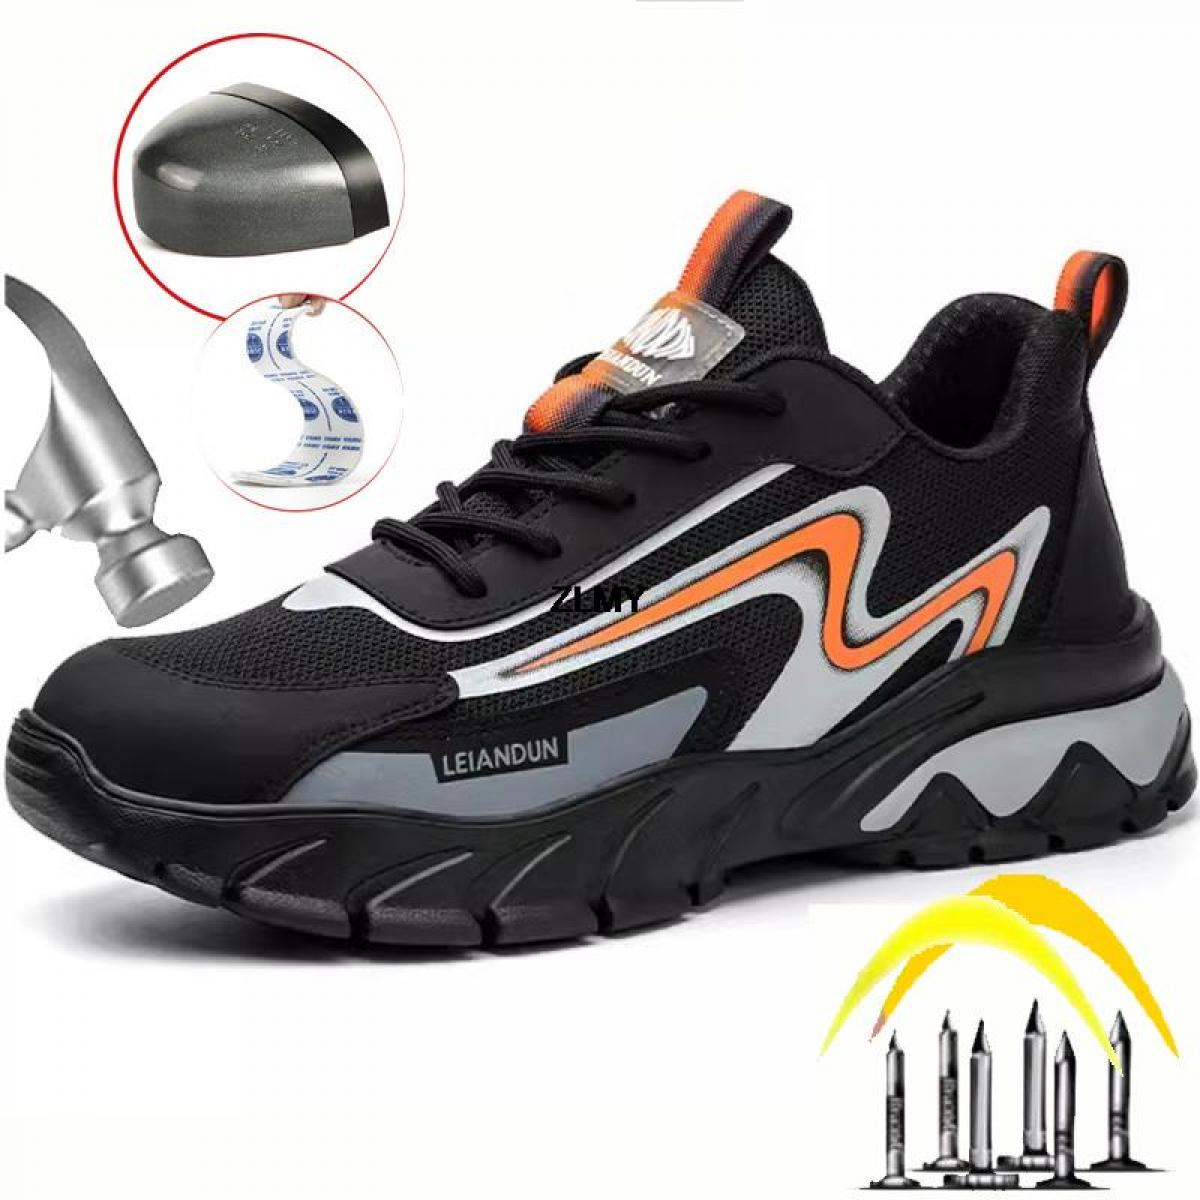 Steel Toe Sneaker Mens Safety Shoes Puncture Proof Work Boots Antismash Protective Work Shoes Man Security Boots Breatha